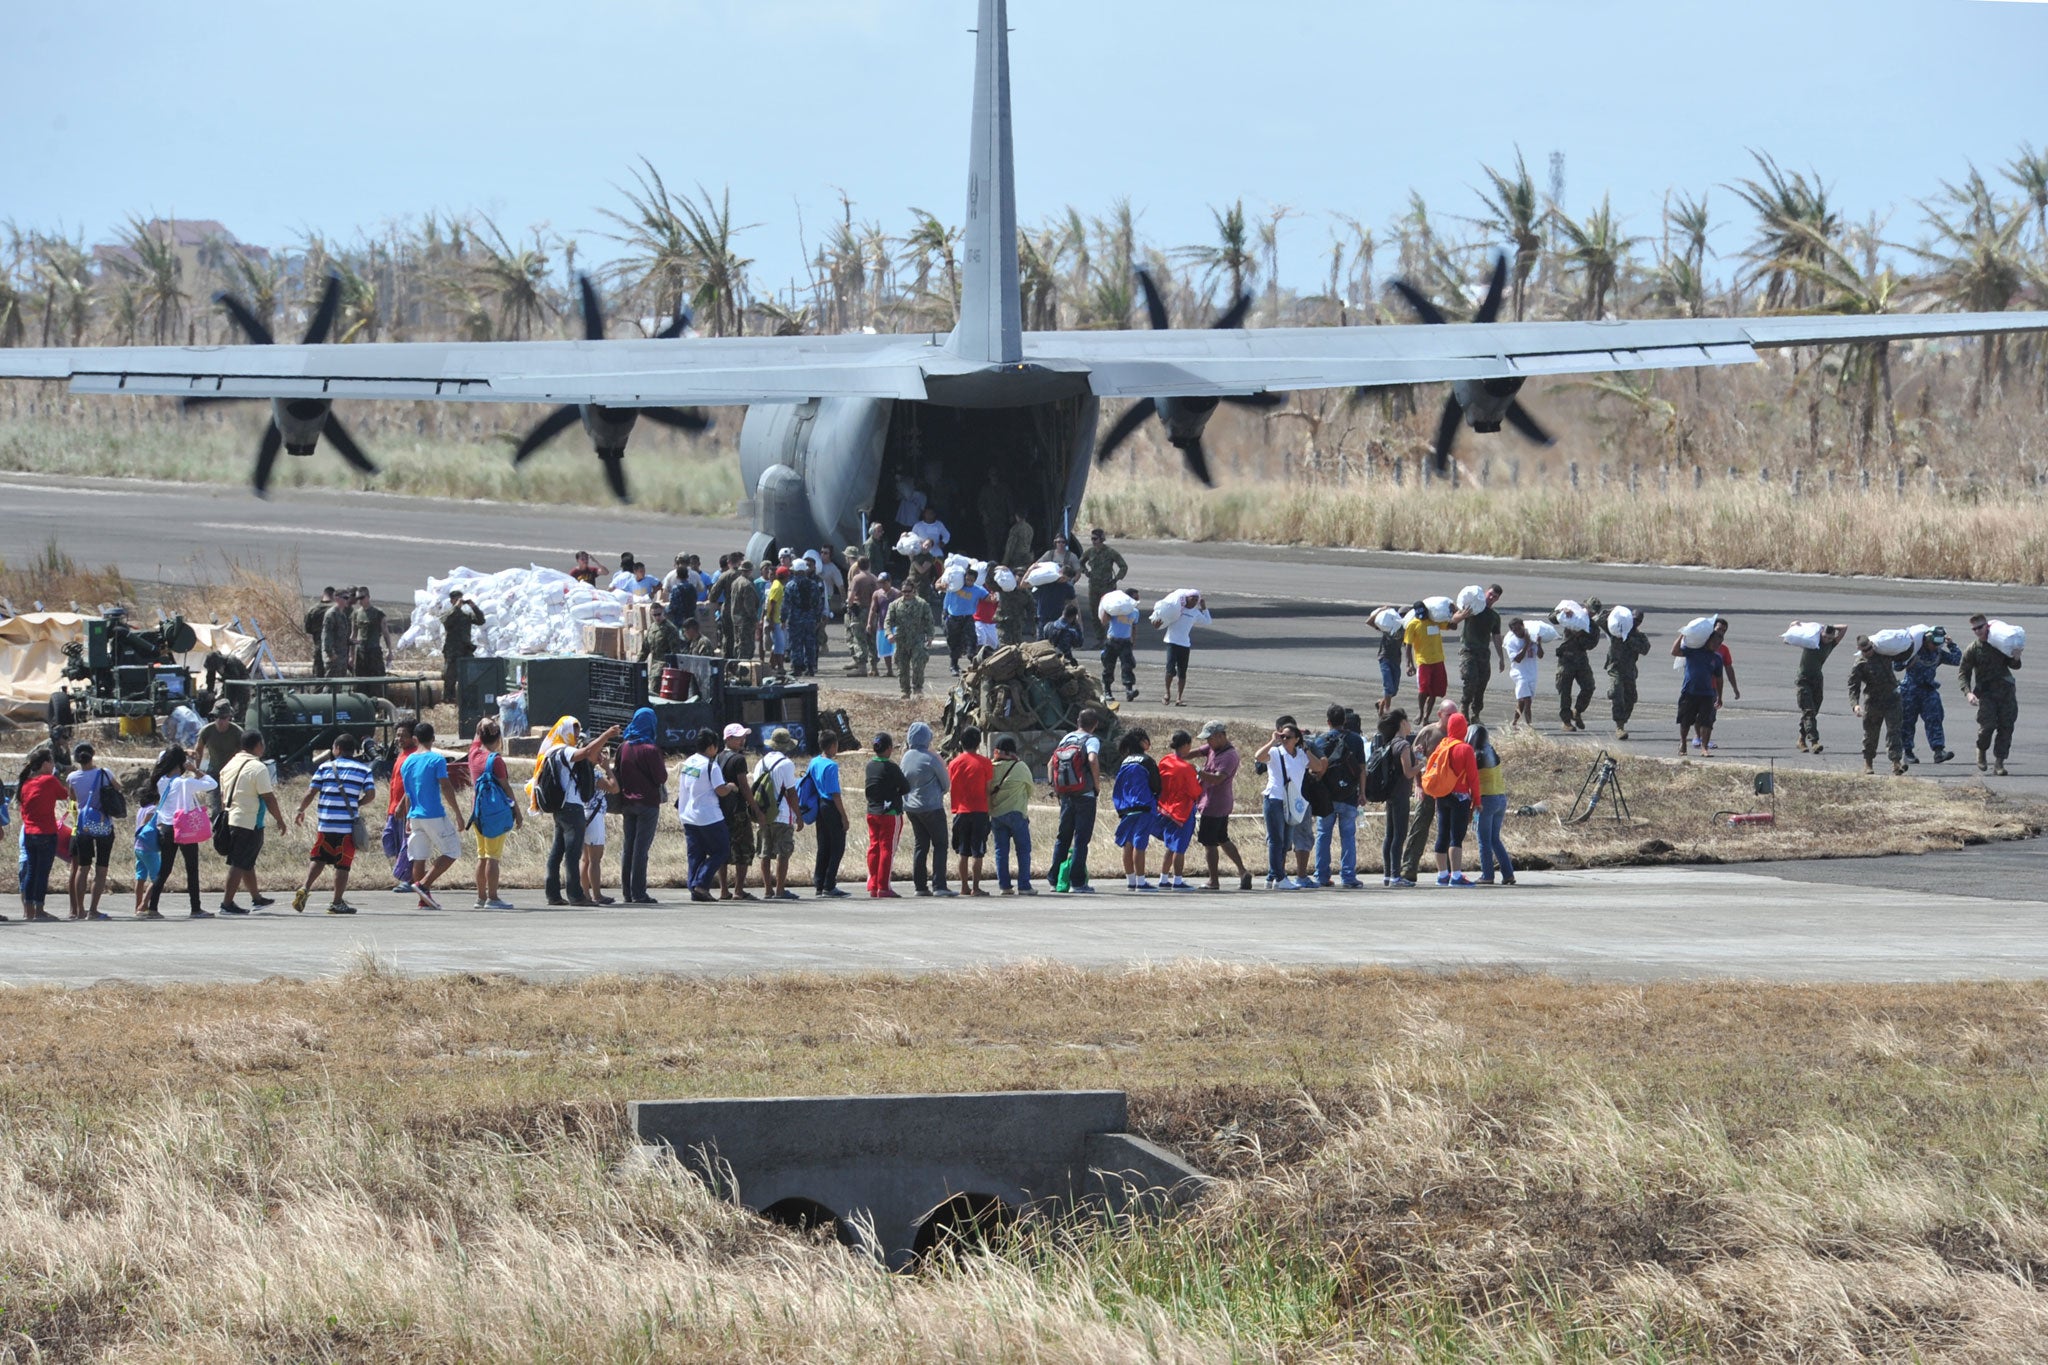 A crowd gathers on the airstrip in Guiuan as a US plane delivers aid in the aftermath of Typhoon Haiyan